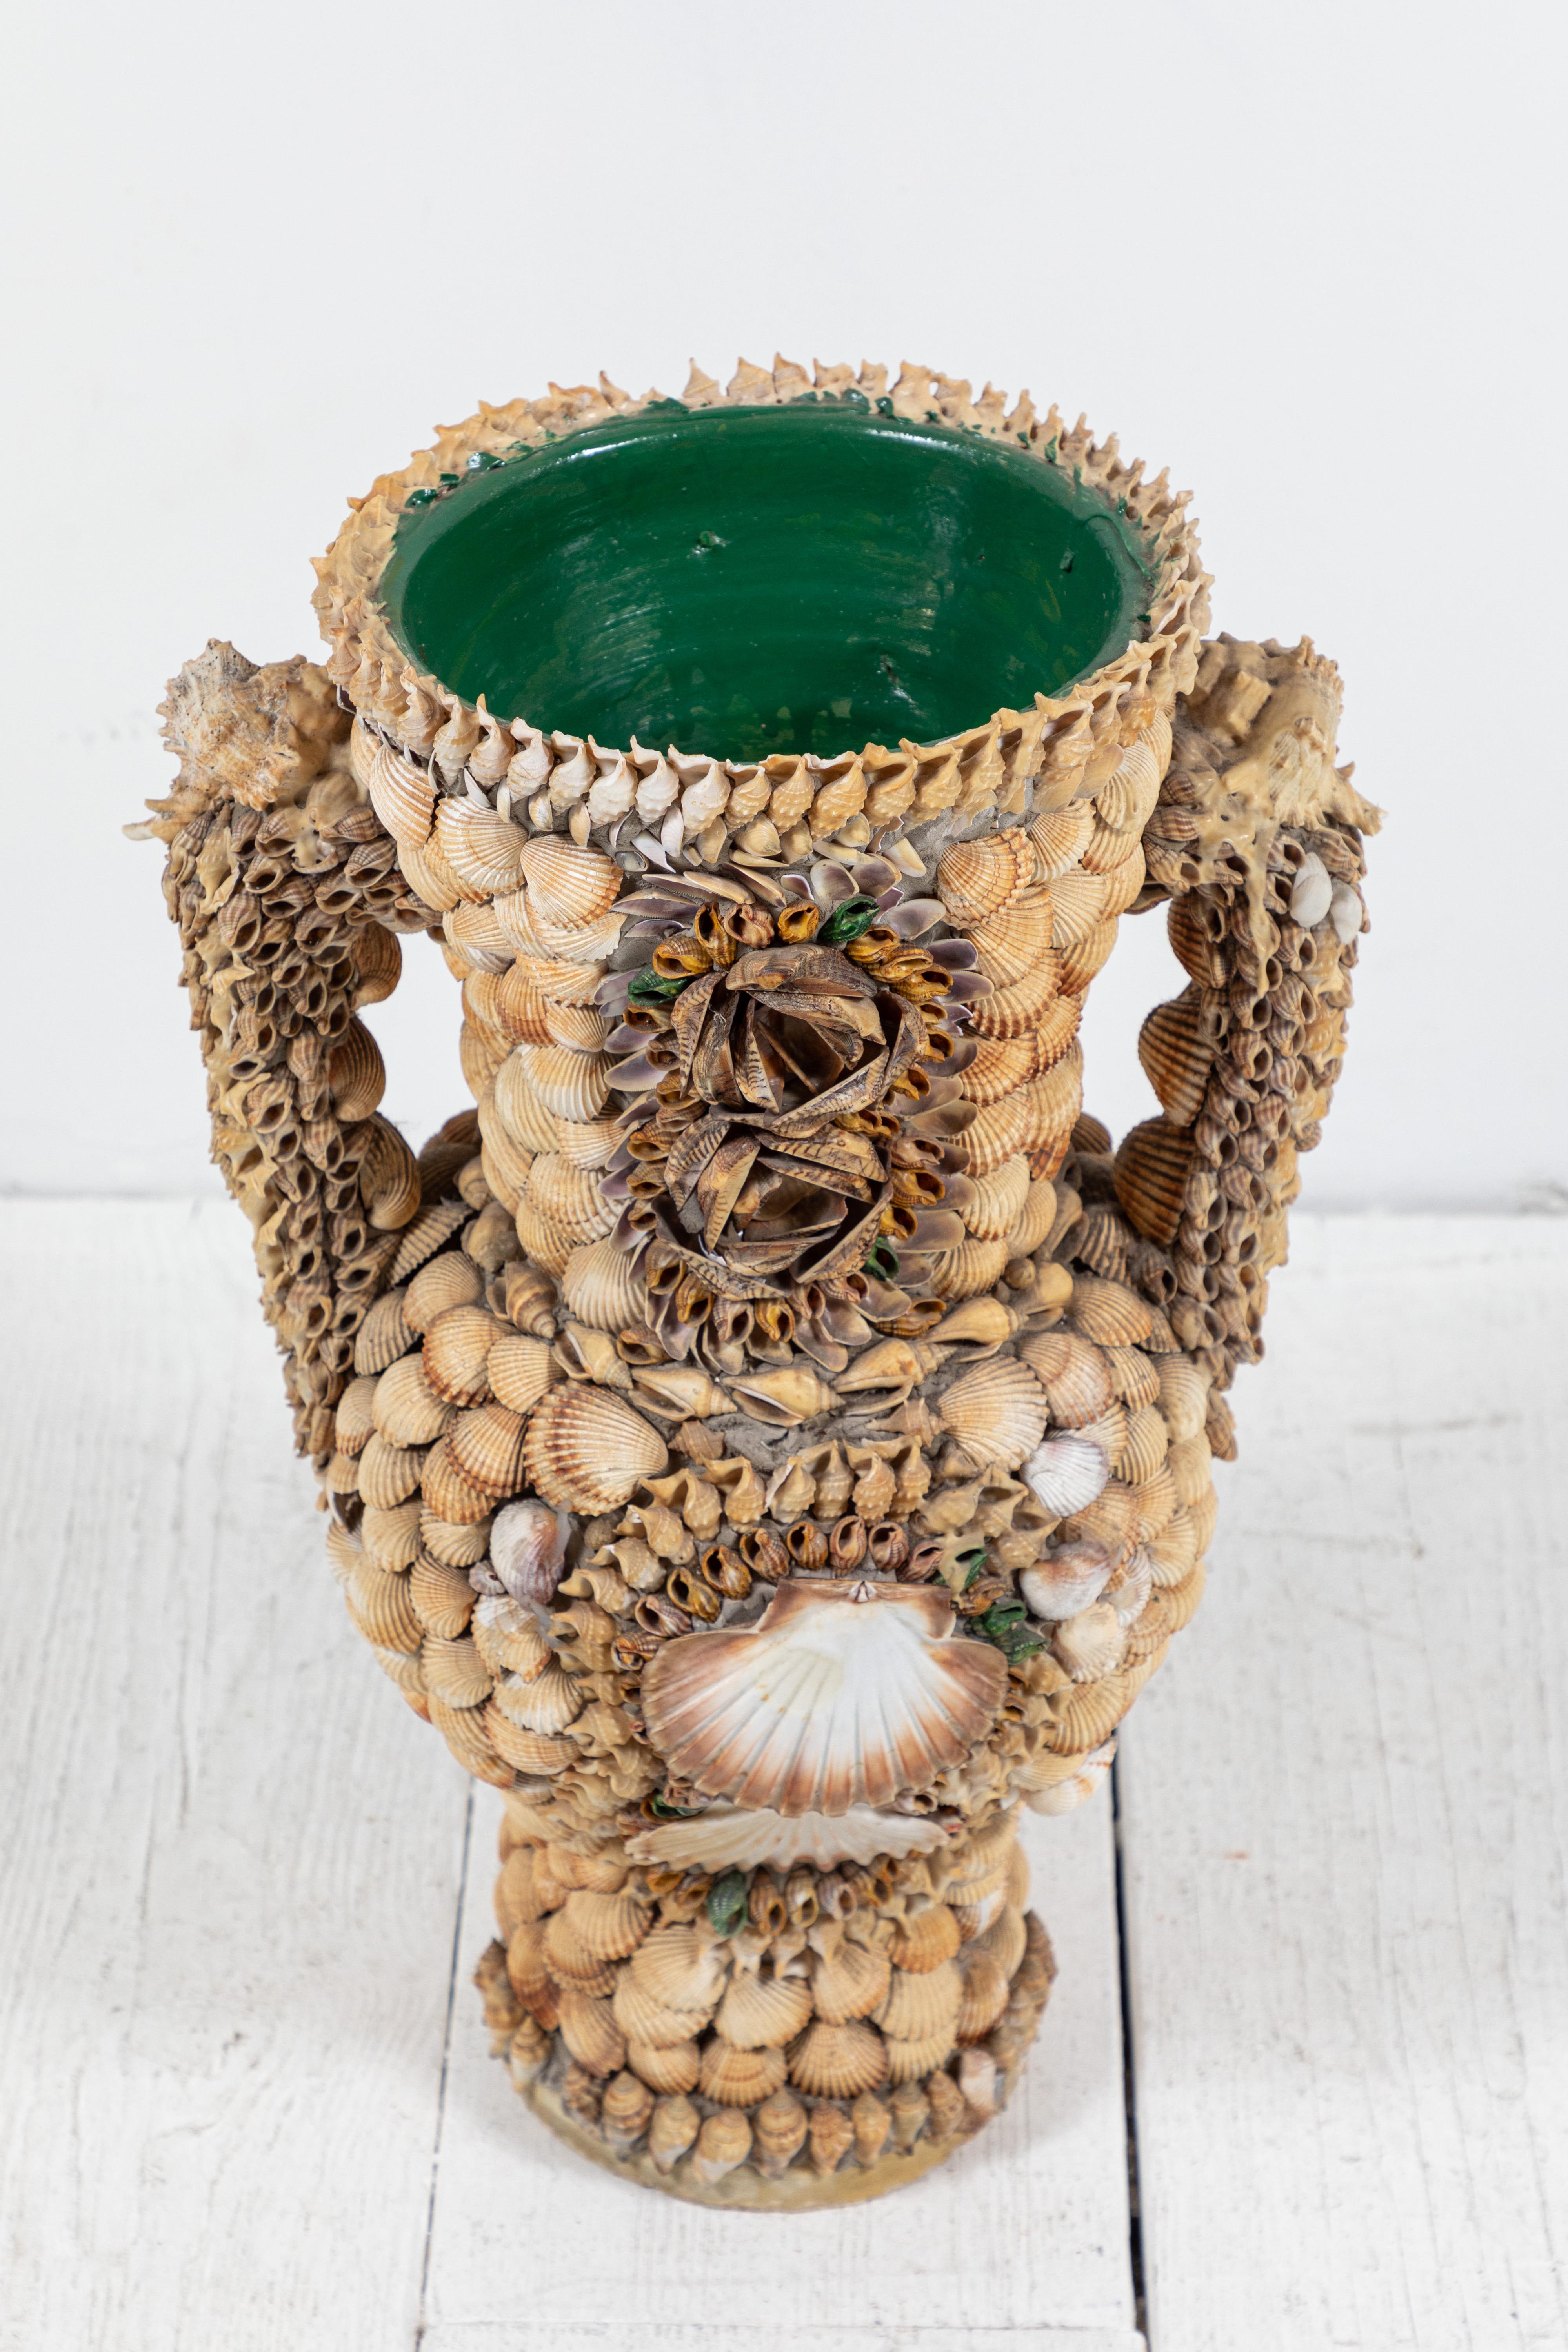 Fun and whimsical French urn adorned with an assortment of Shells. Interior glazed green.